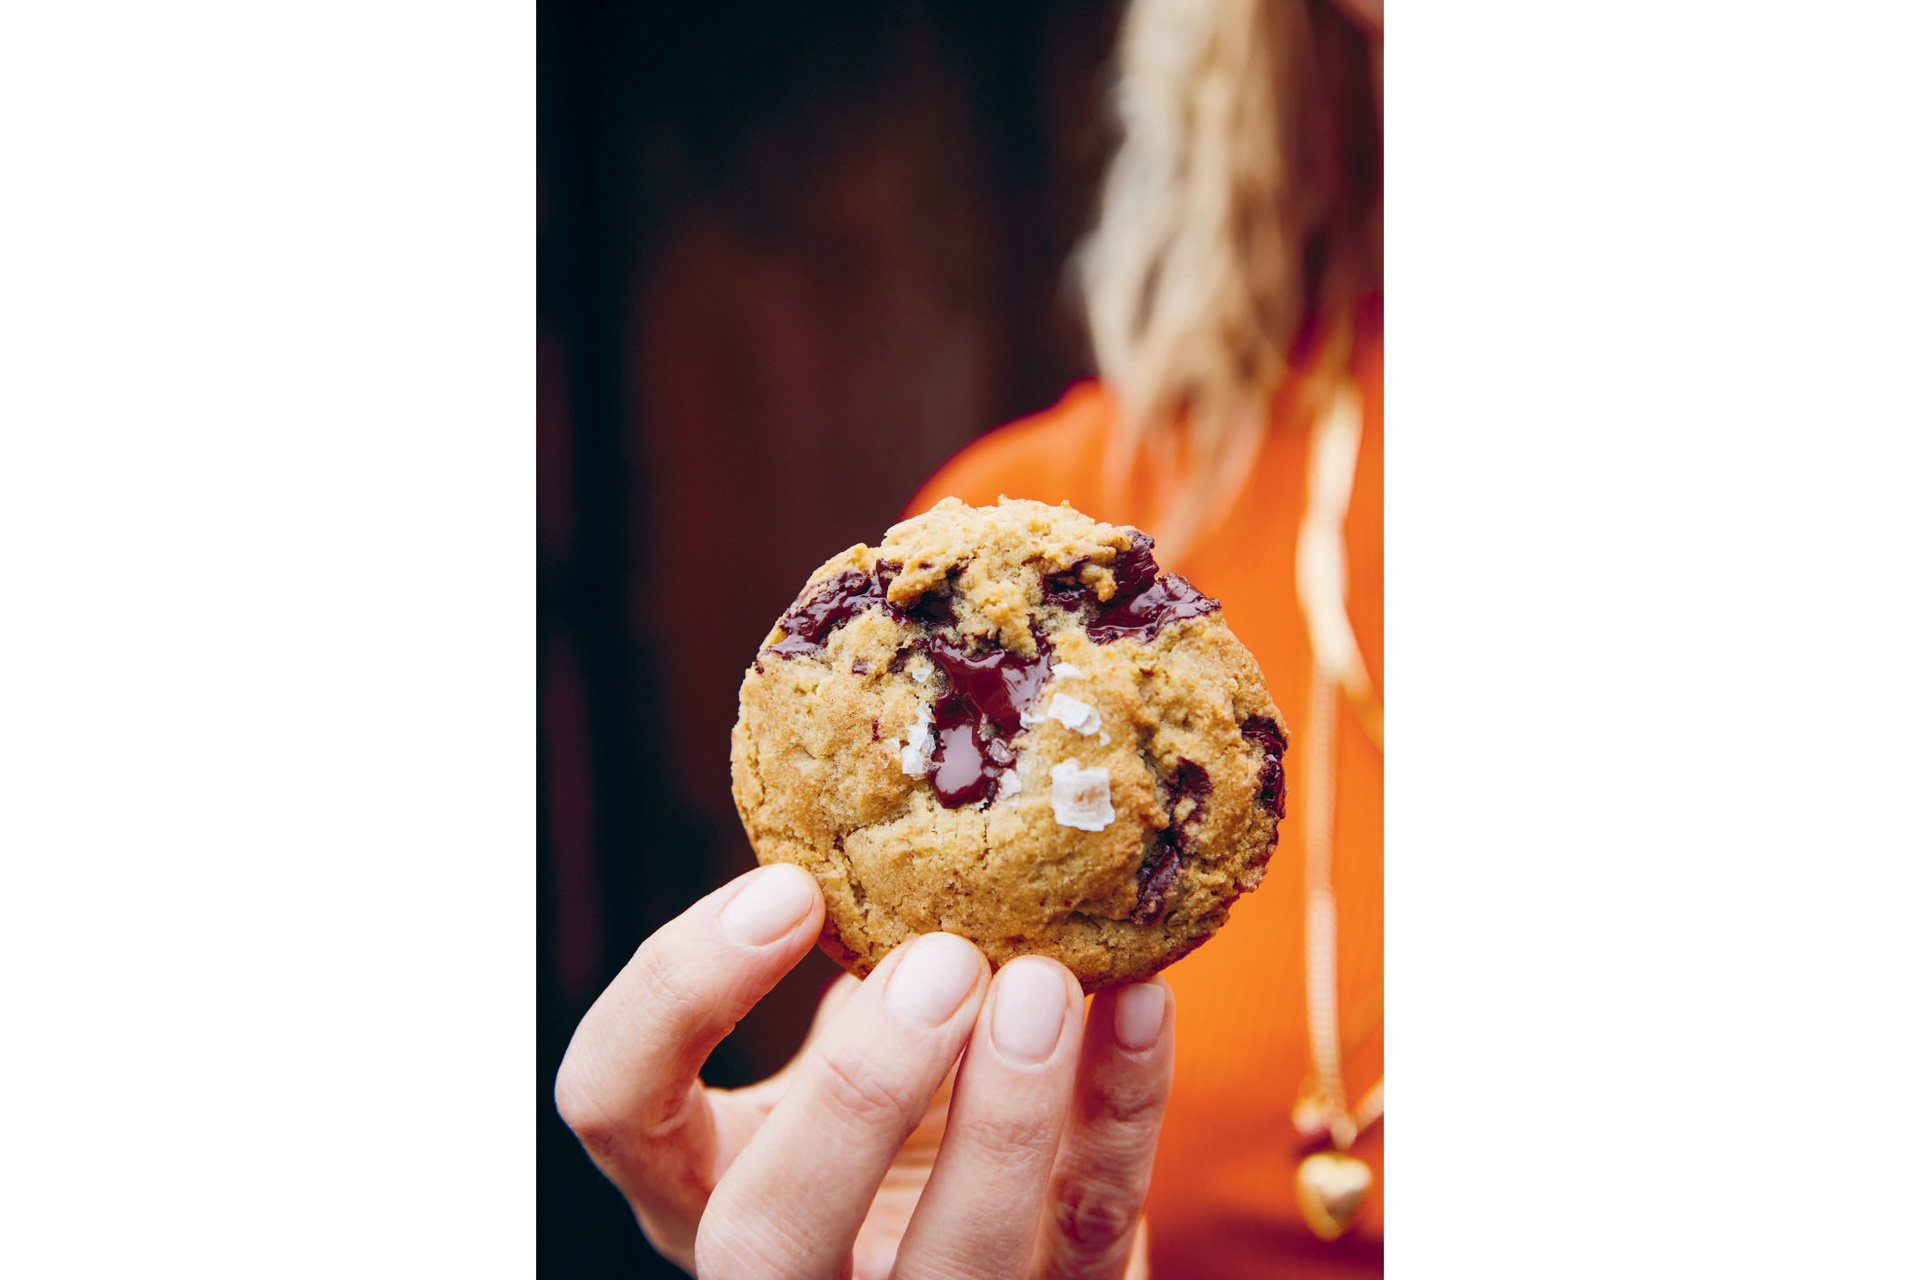 Vegan chocolate chip cookies by Claire Ptak